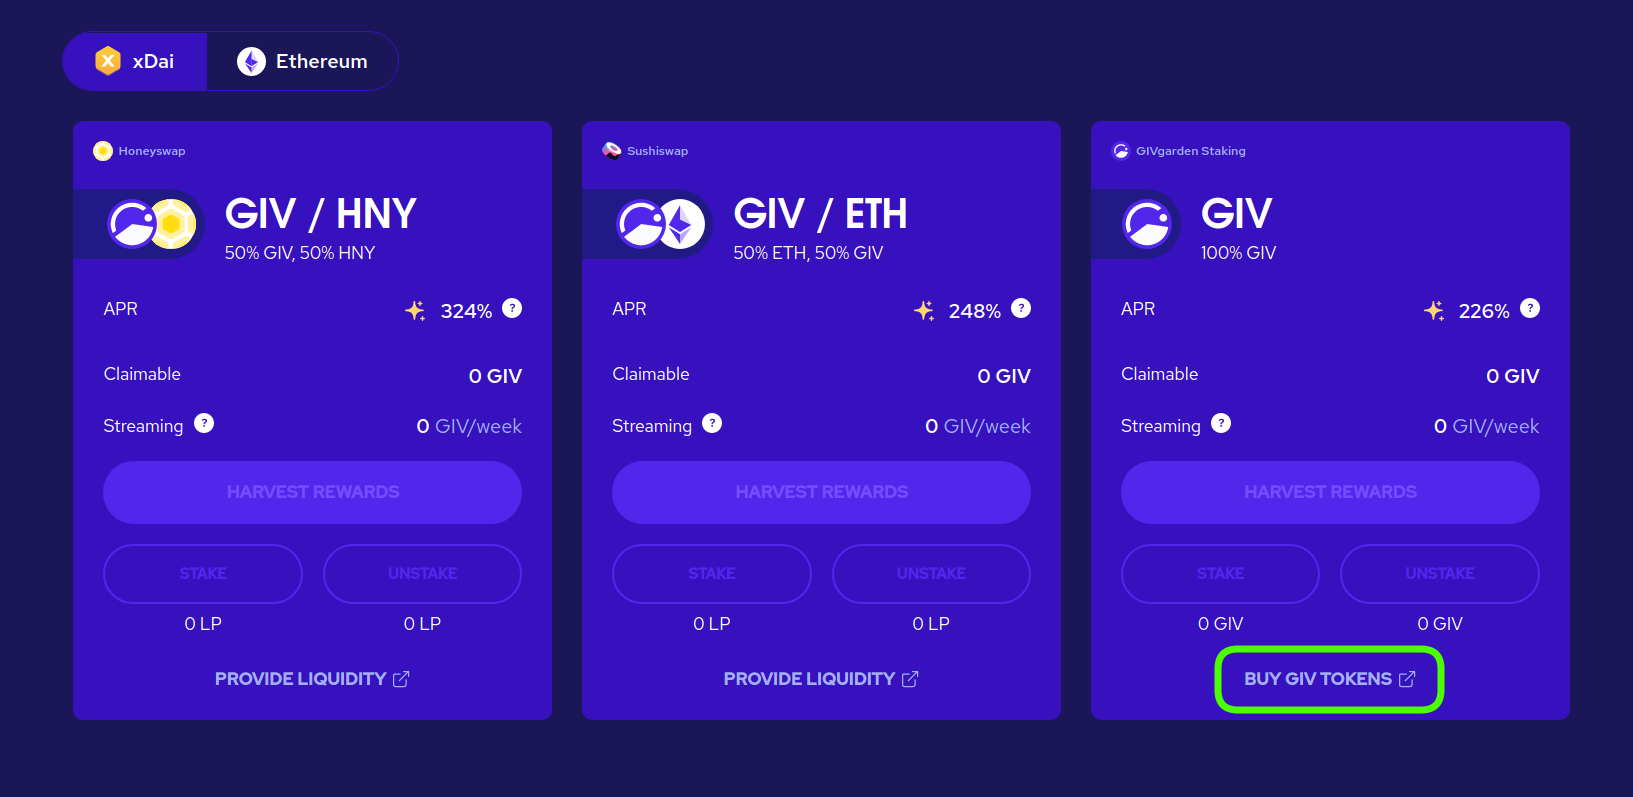 buy tokens link from GIVfarm